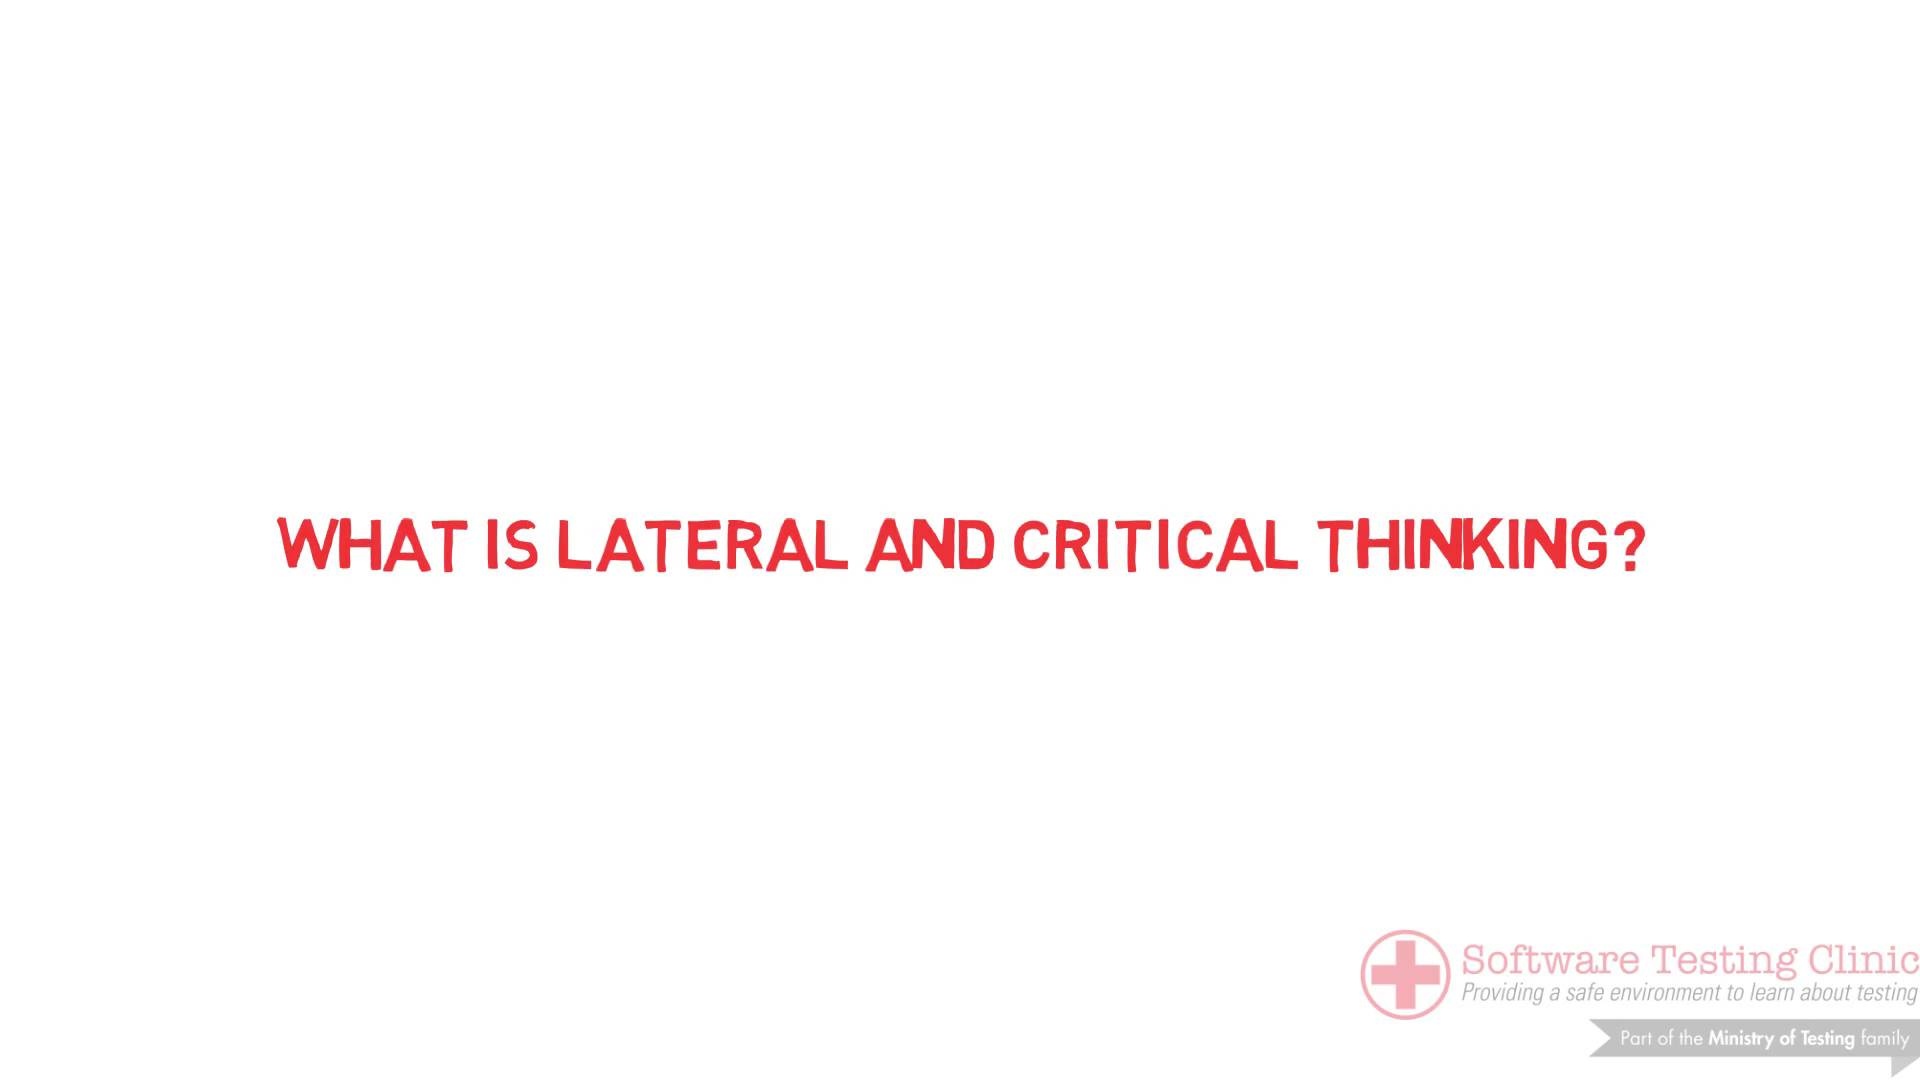 What is Lateral and Critical Thinking?